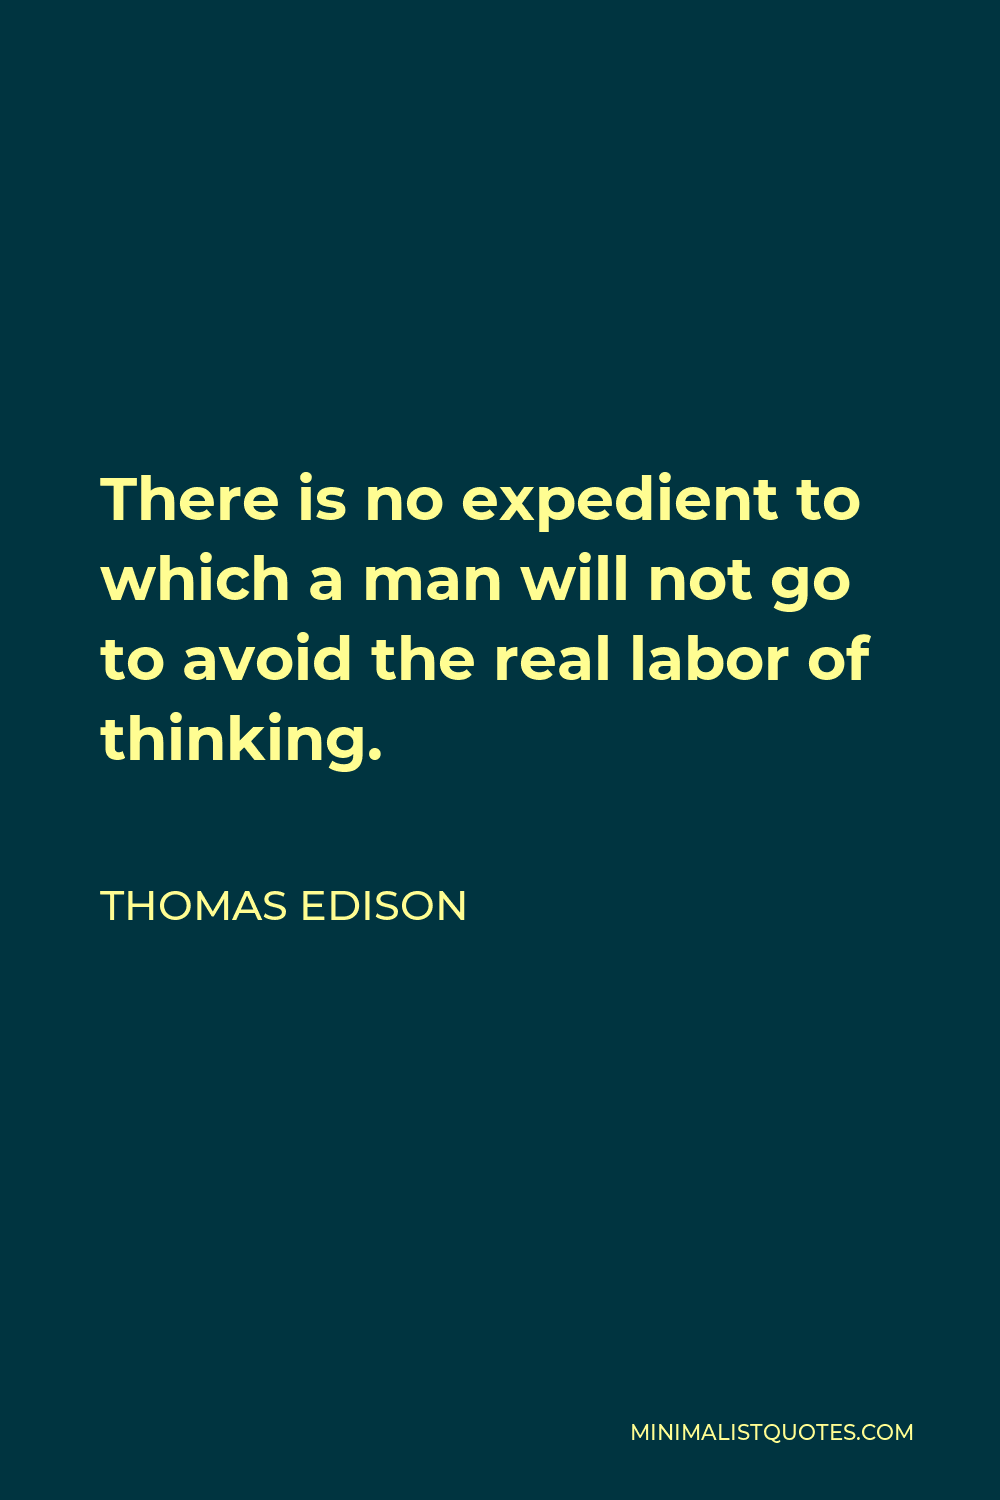 Thomas Edison Quote - There is no expedient to which a man will not go to avoid the real labor of thinking.